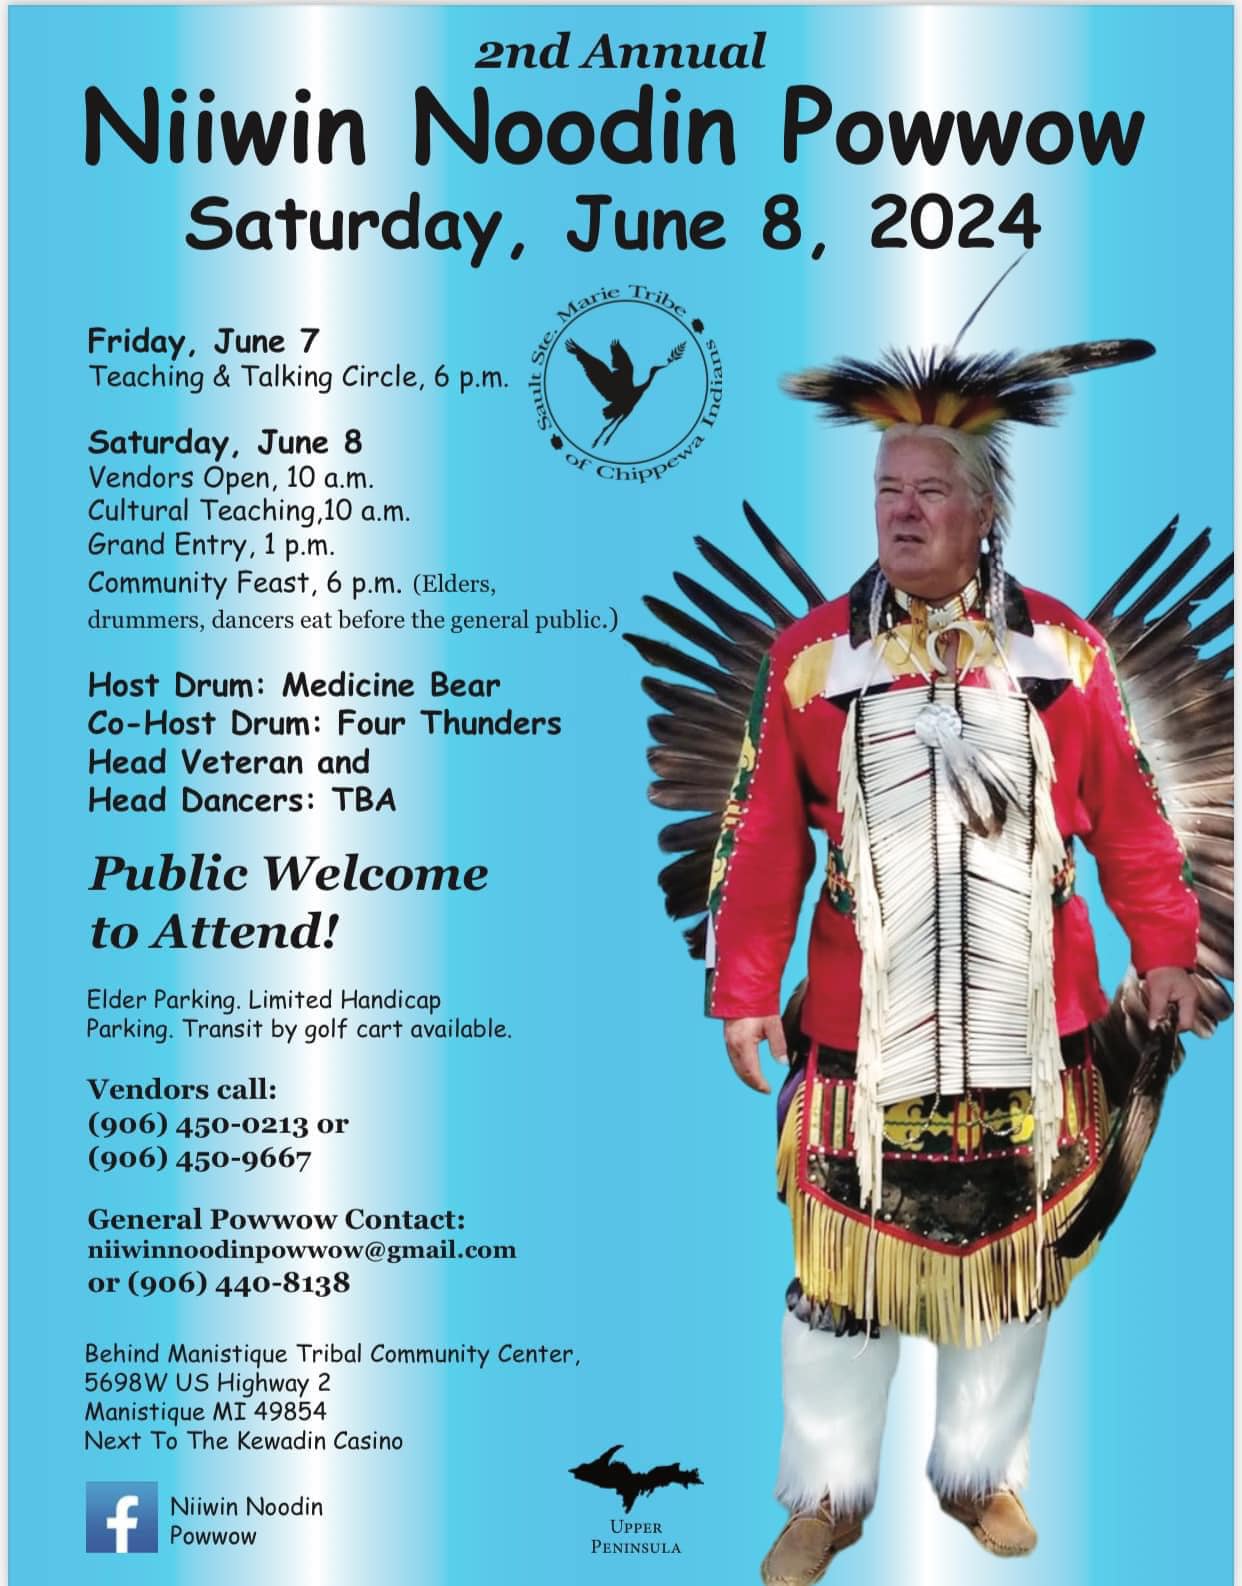 2nd Annual Niiwin Noodin Powwow, Saturday, June 8, 2024, Friday, June 7: Teaching and Taling Circle at 6 pm. Saturday, June 8th: Vendors Open, 10 am, Cultural Teaching, 10 am; Grand Entry, 1pm; Community Feast, 6 pm (Eldeers, drummers, dancers eat before the general public) Host drum: Medicine Bear; Co-Host Drum: Four Thunders Head Veteran and Head Danxers: TBA . Public Welcome to Attend! Elder Parking LImtied to Handicap Parking Transit by golf cart available. Vendors call: 906-450-0213 or 906-450-9667; General Powwow Contacr; niiwinnoodinpowwow@gmail.com or 906-440-8138; Behind Manisituqe Tribal Community Center, 5698W US Highway 2, Manistique MI 49854-Next to the Kewadin Casino. Follow us on Facebook.